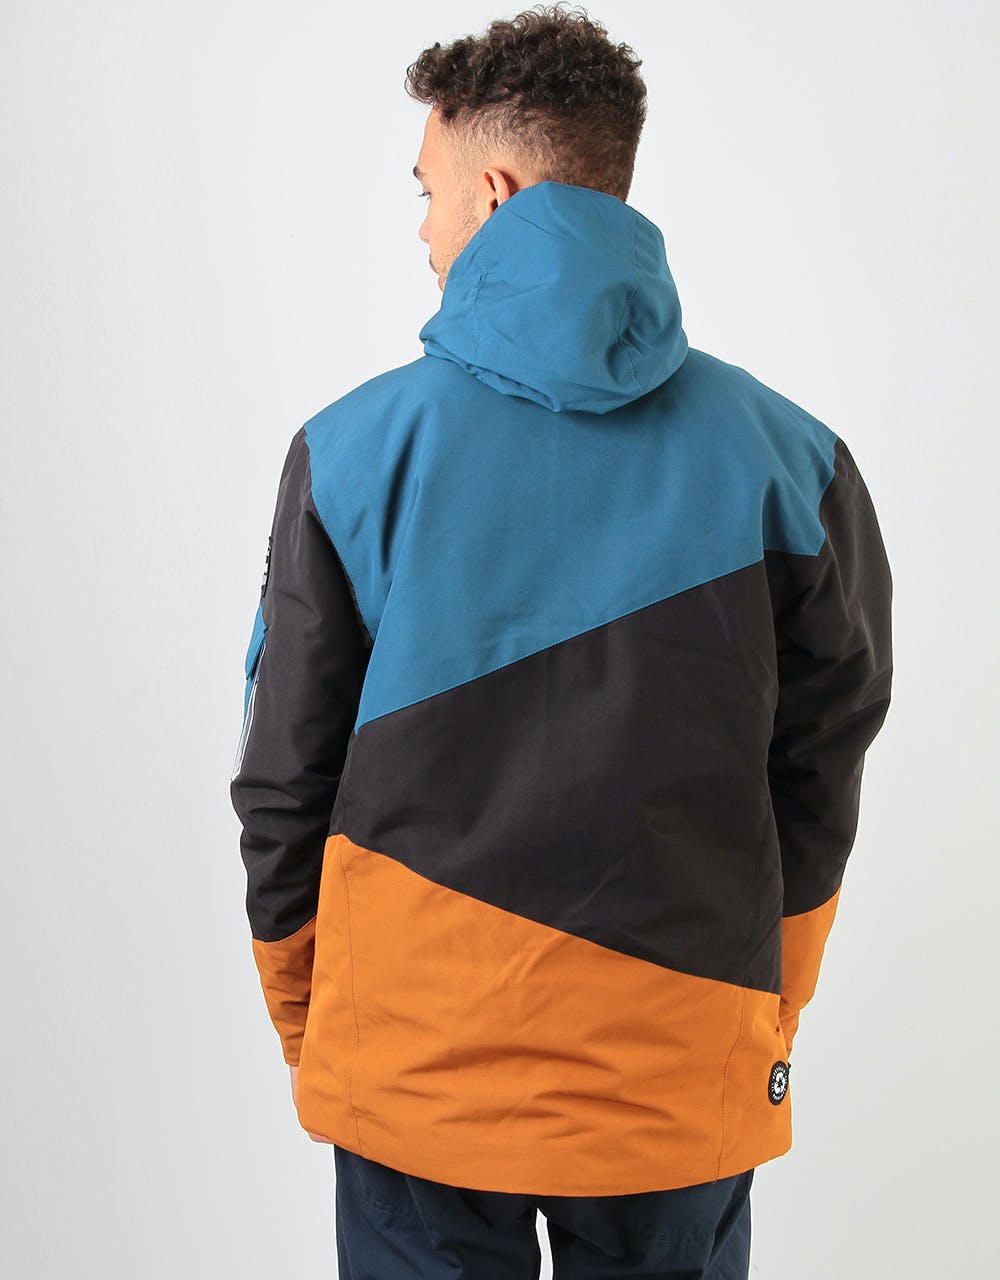 Picture Styler 2020 Snowboard Jacket - Camel